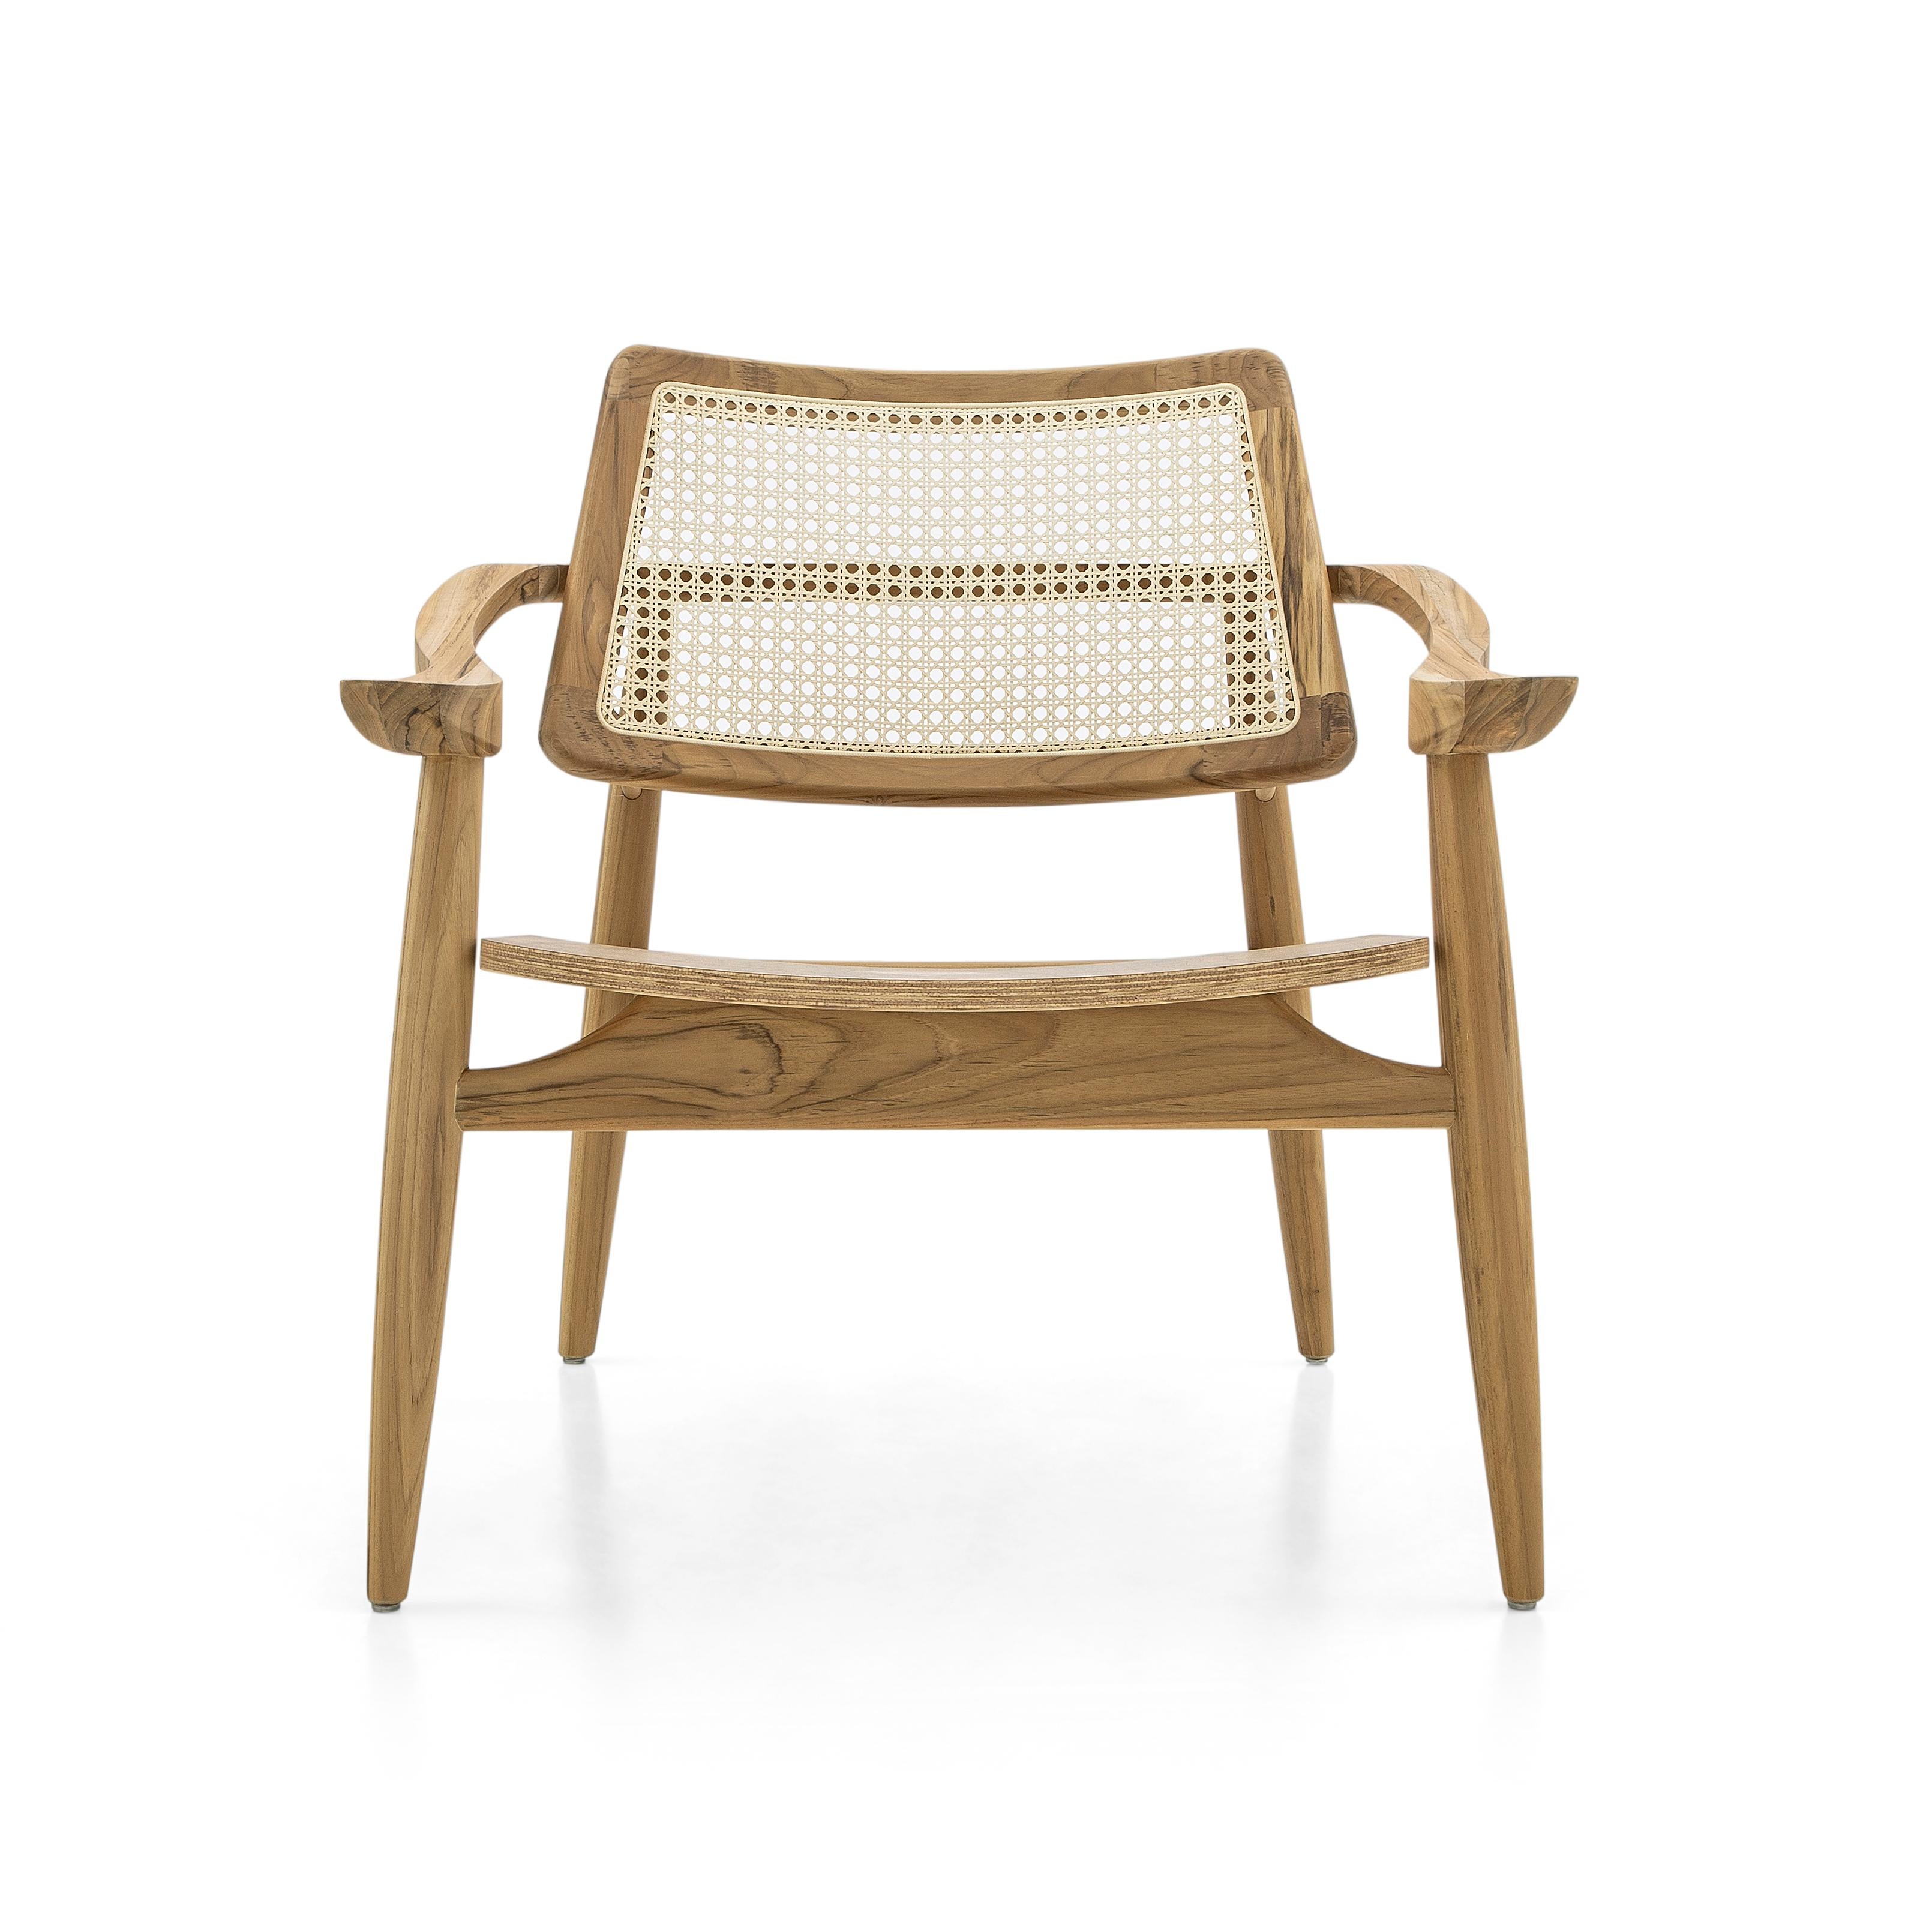 Brazilian Turn Armchair Cane-Back Chair with Shaped Wooden Seat in Teak Wood Finish For Sale